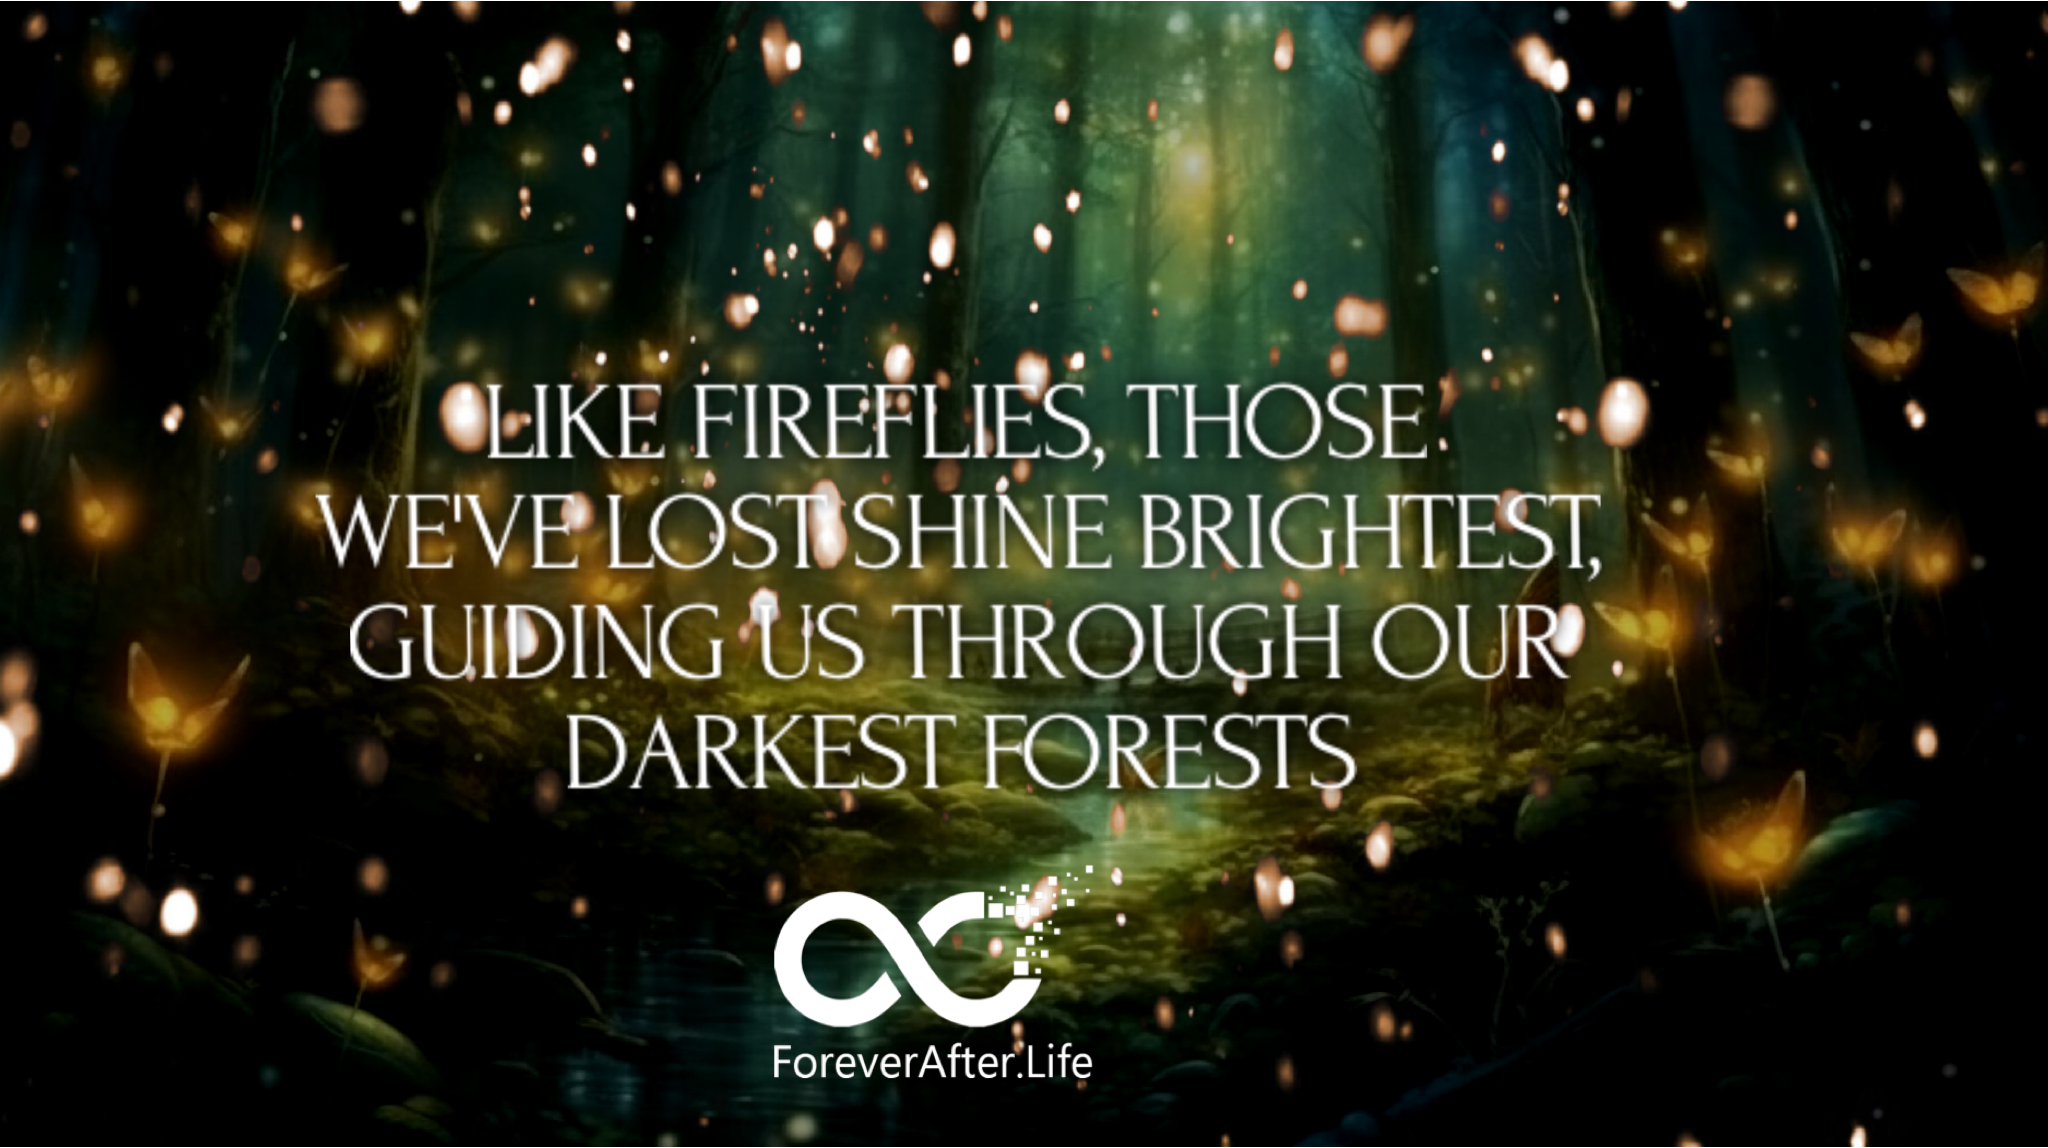 Like fireflies, those we've lost shine brightest, guiding us through our darkest forests